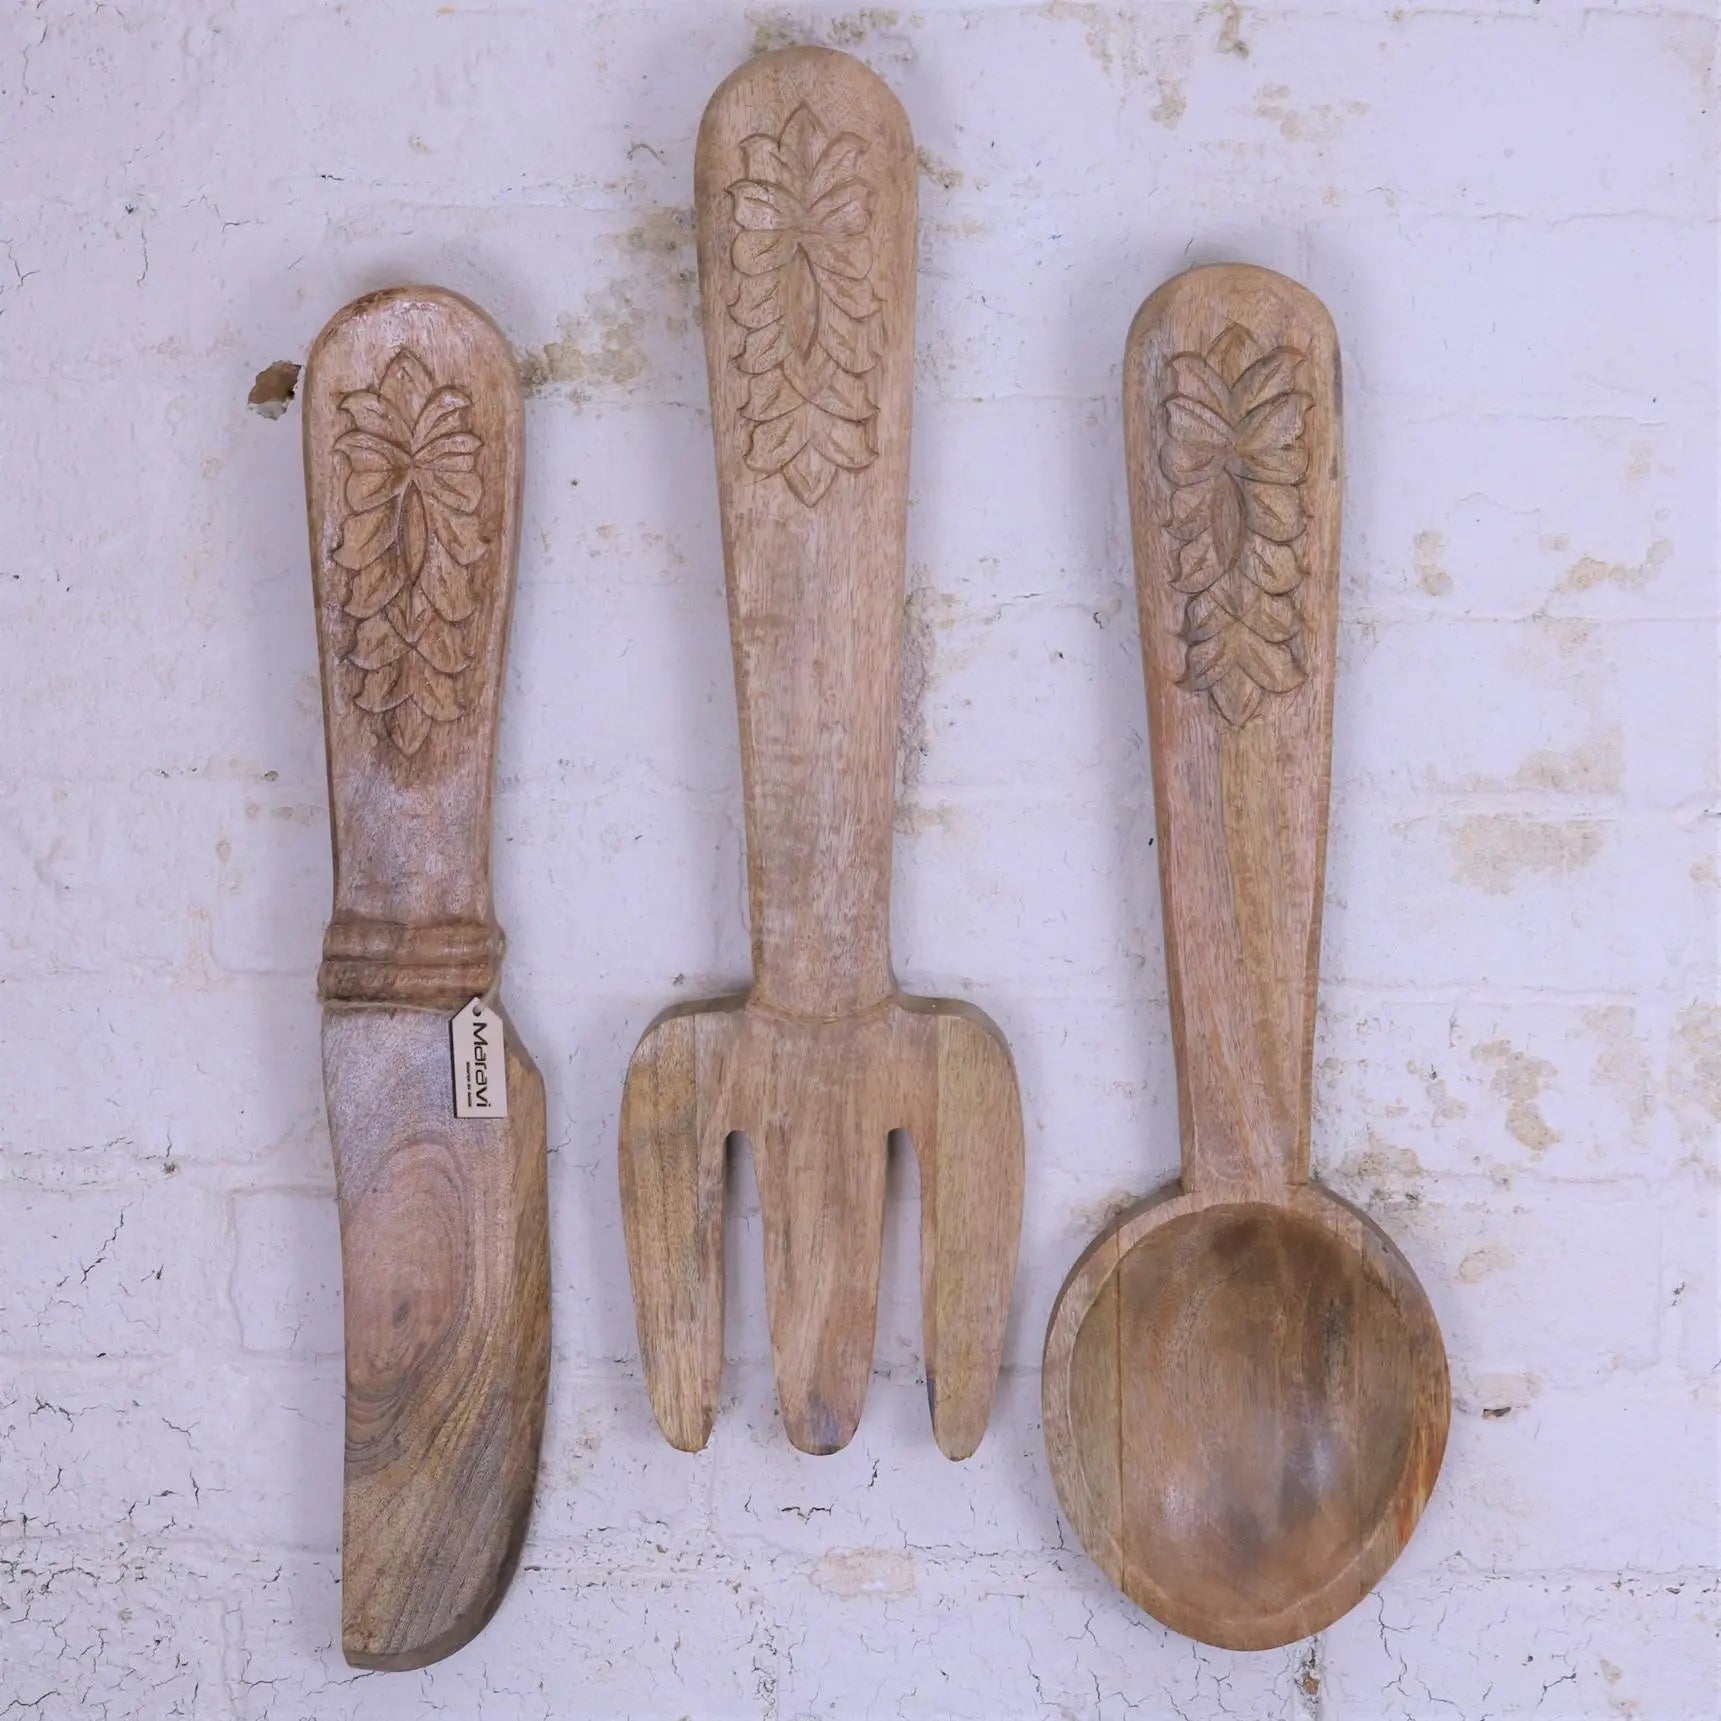 Mawbri Wooden Display Kitchen Giant Cutlery Spoon Fork and Knife - Main Image